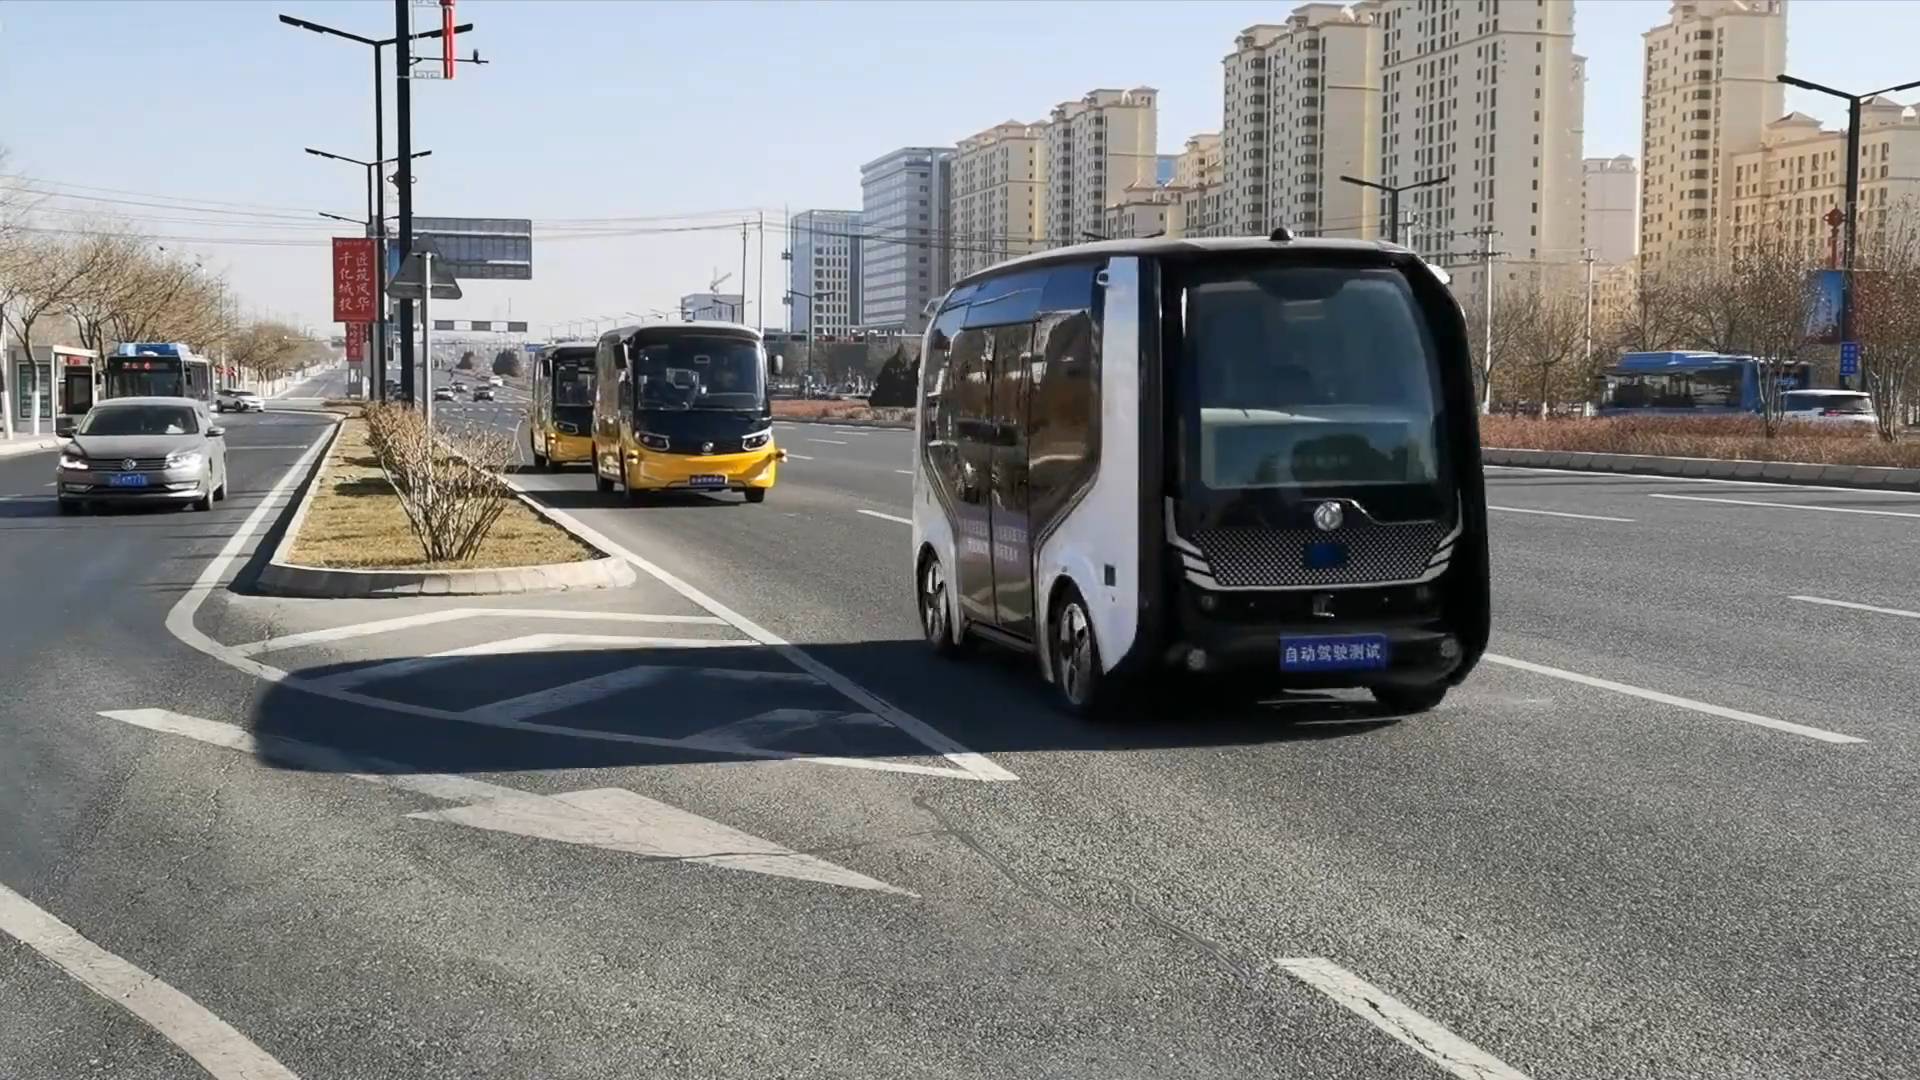 GLOBALink | NW. China's Lanzhou starts on-road testing of self-driving cars